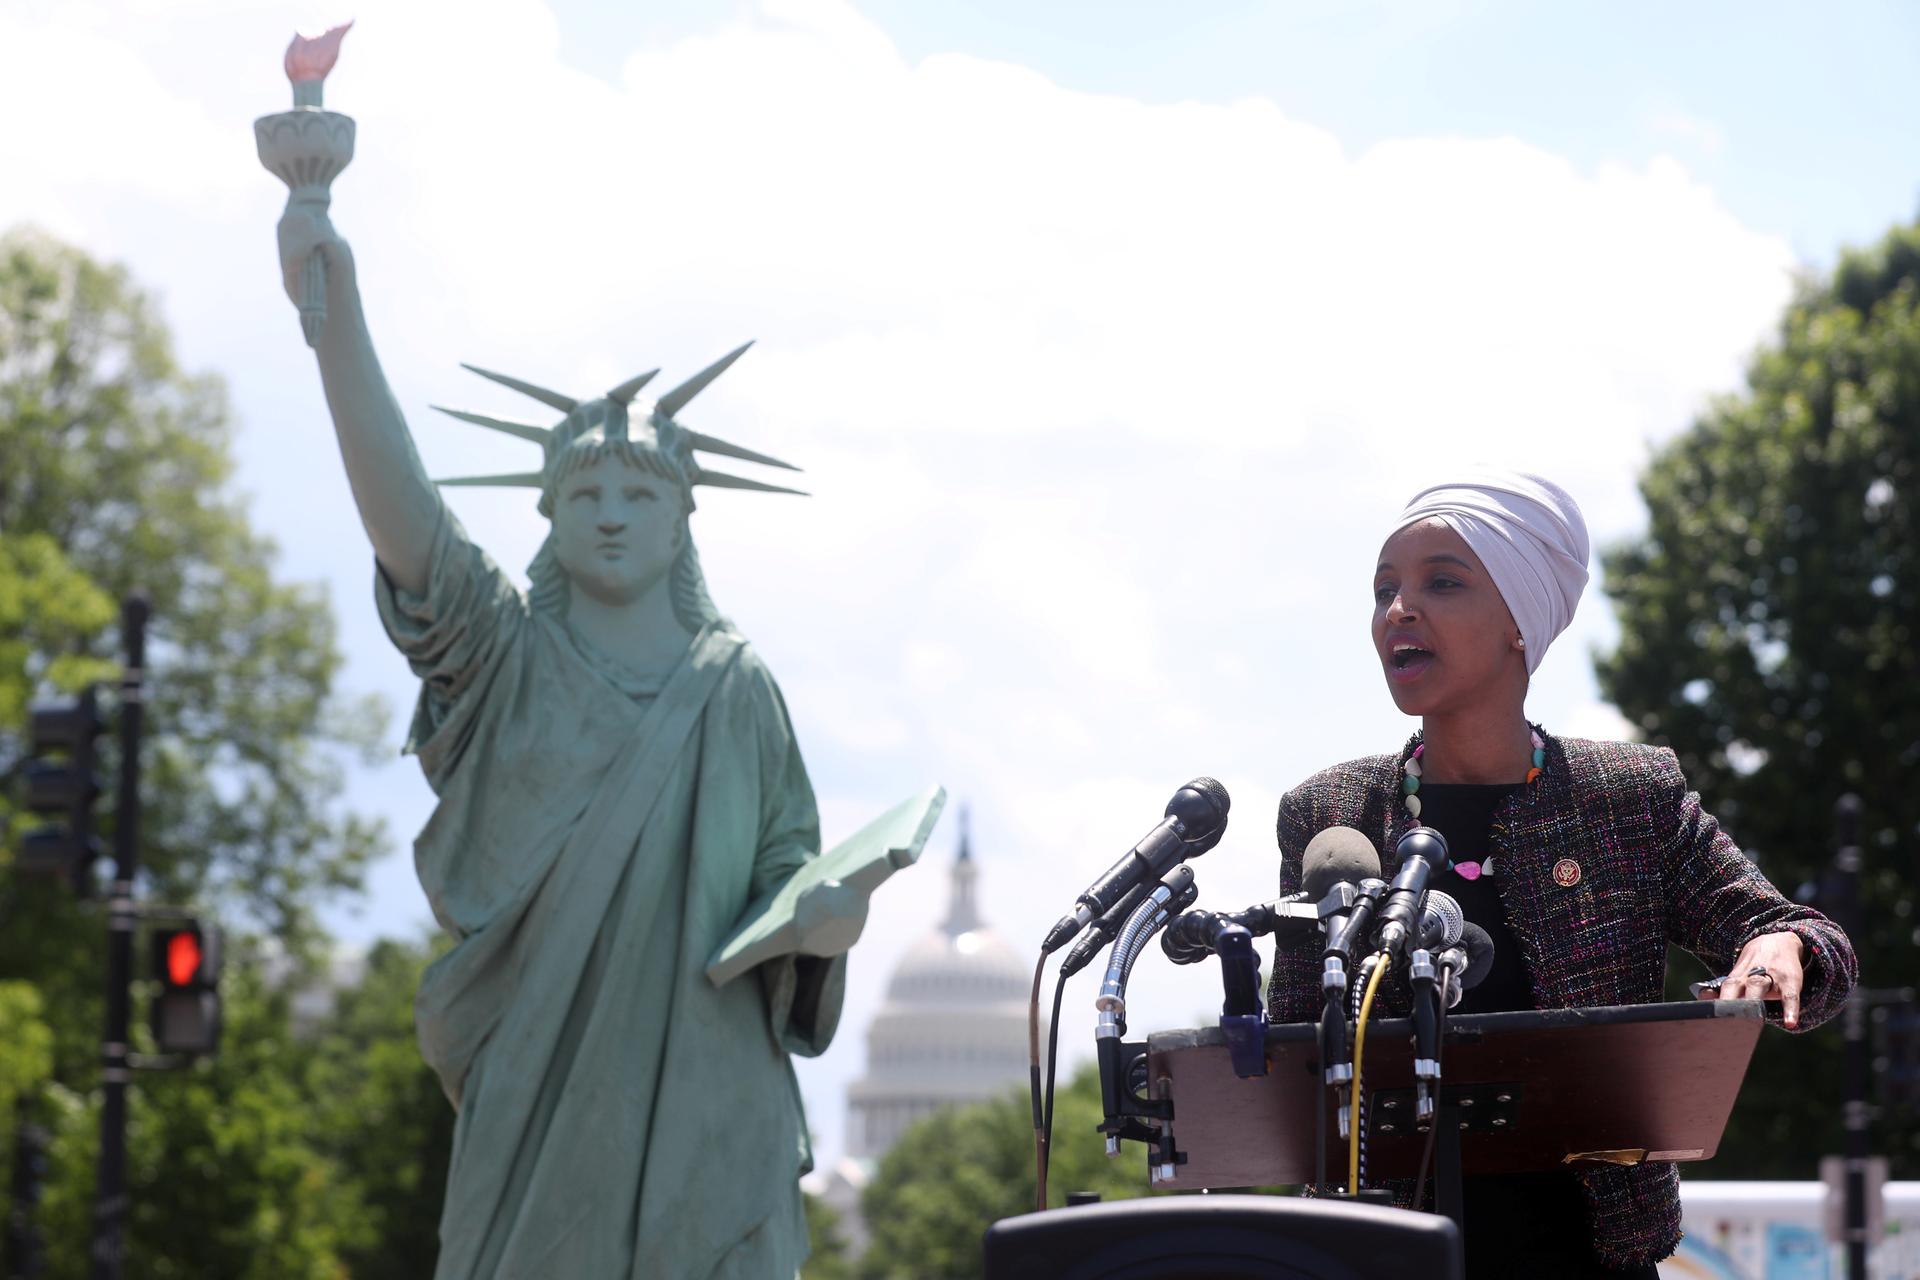 US Representative Ilhan Omar addresses a small rally on immigration rights at the temporary installation of a replica of the Statue of Liberty at Union Station in Washington, US May 16, 2019. 